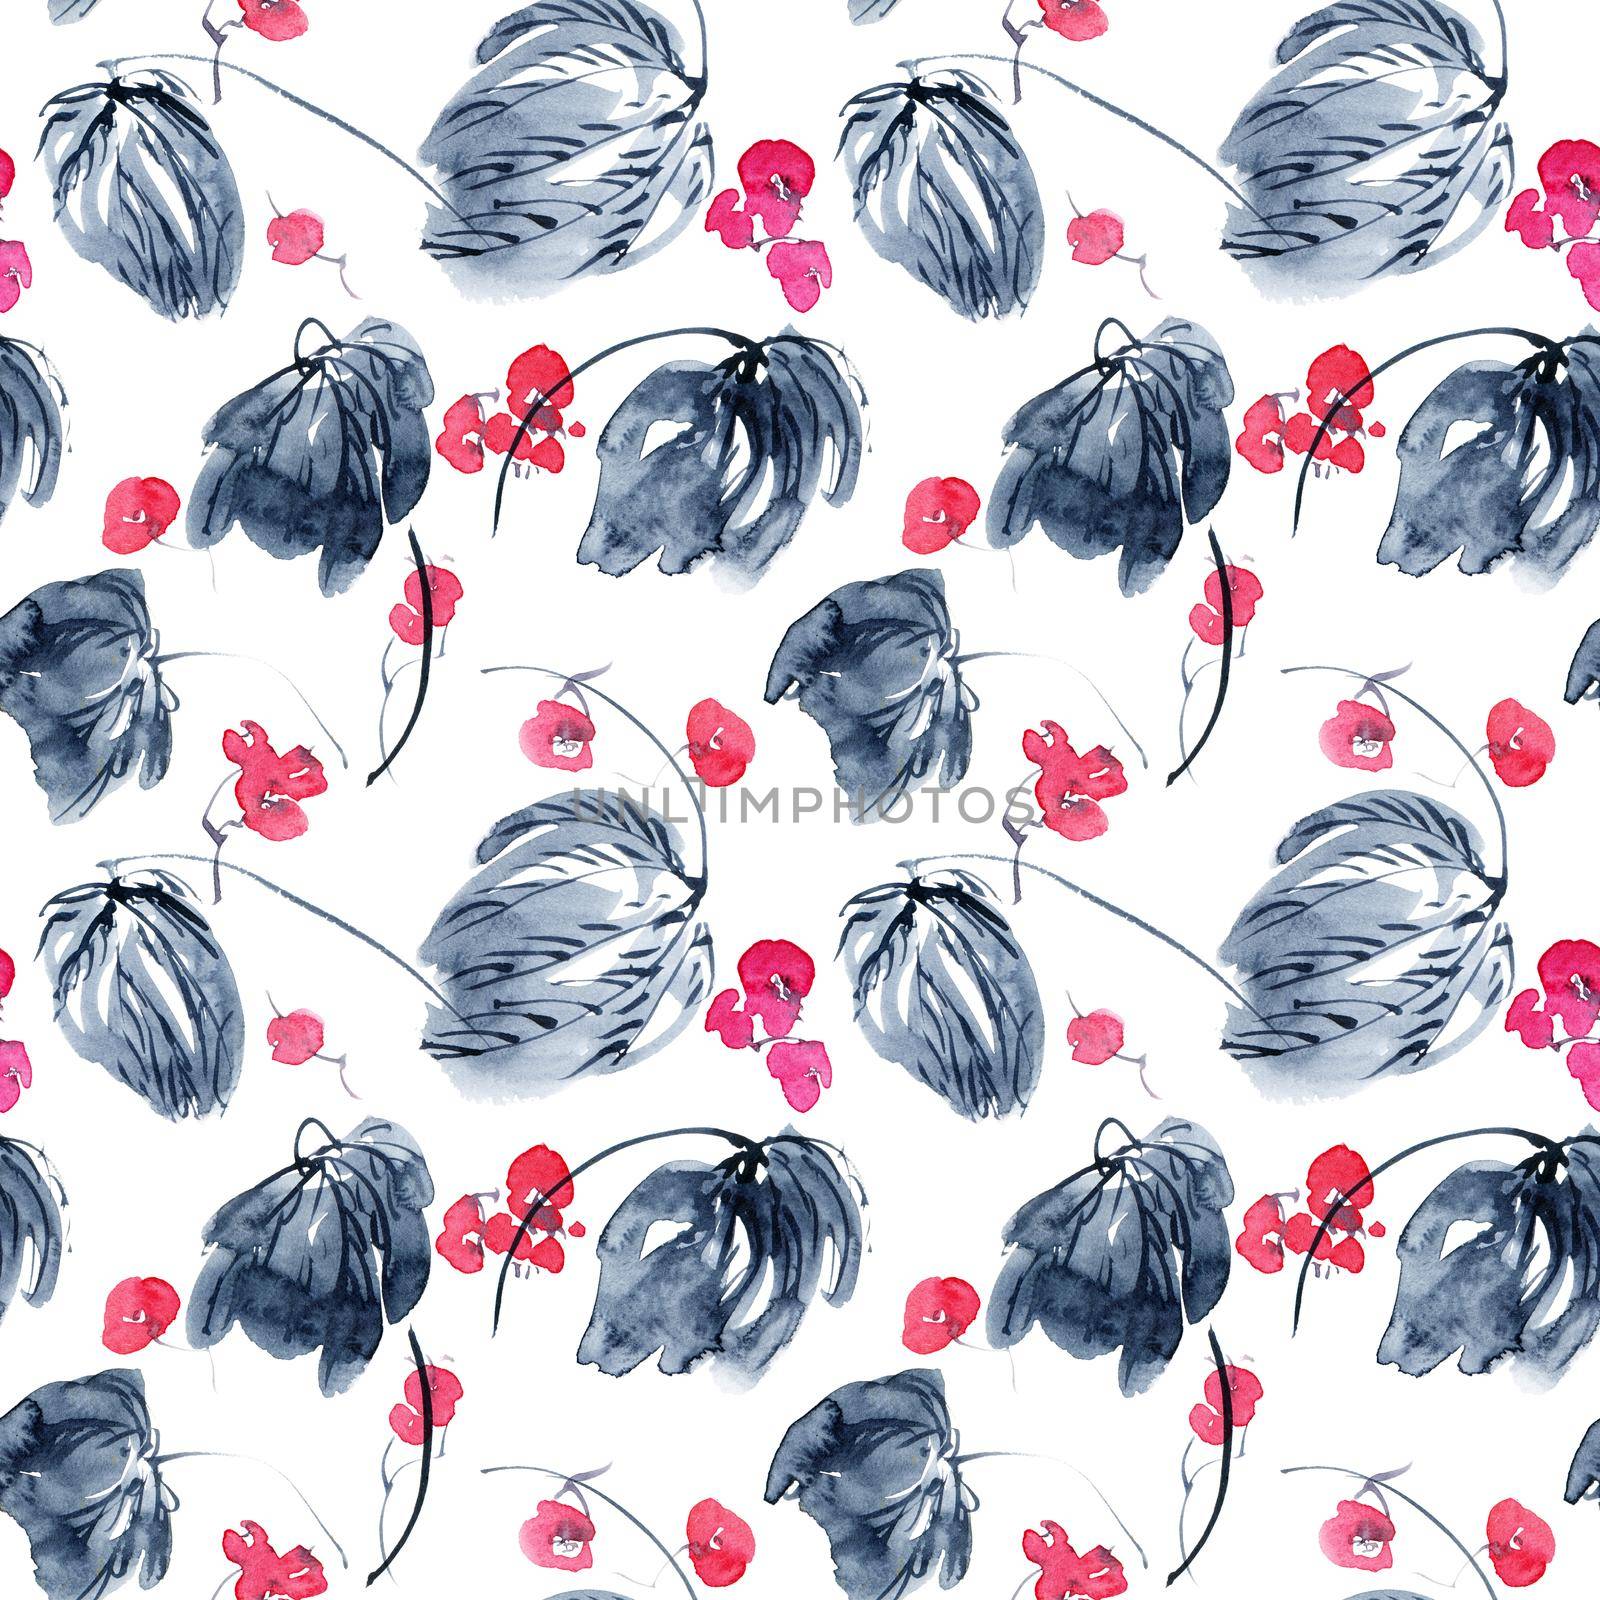 Watercolor seamless pattern of pink flowers and leaves. Oriental traditional painting in style sumi-e, u-sin and gohua.